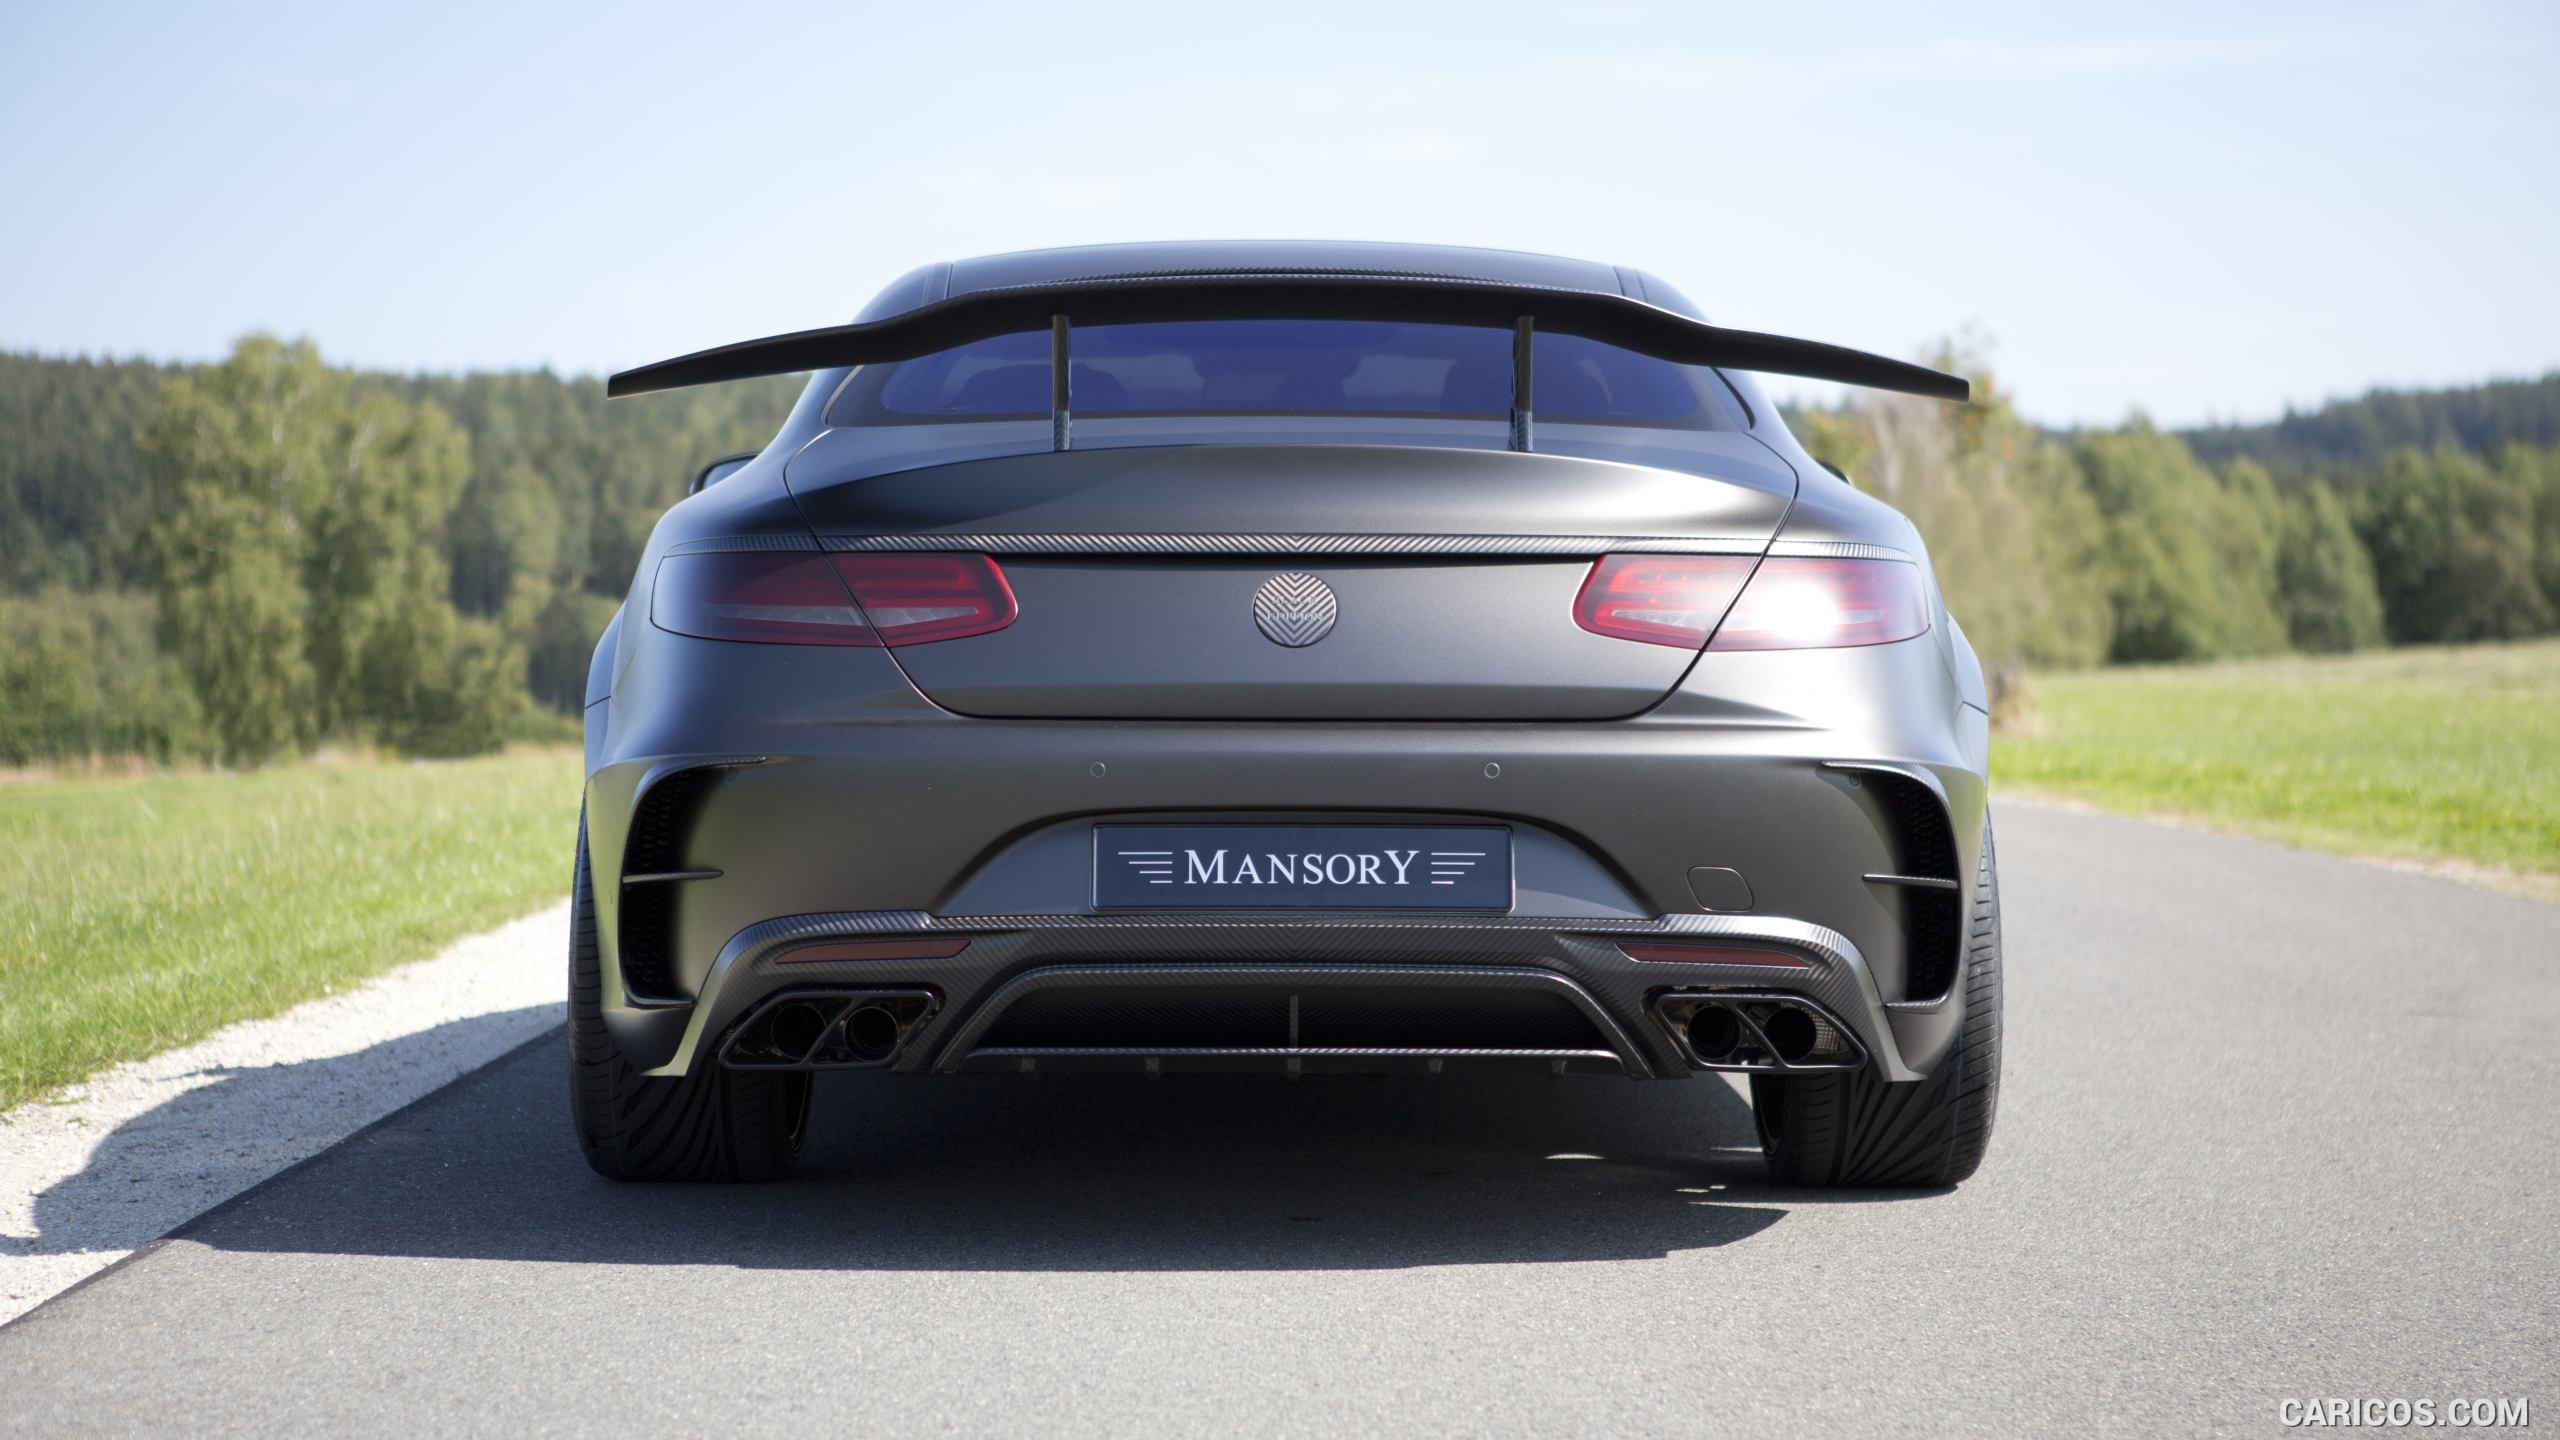 2015 MANSORY Mercedes S63 AMG Coupe Black Edition - Rear, #4 of 12